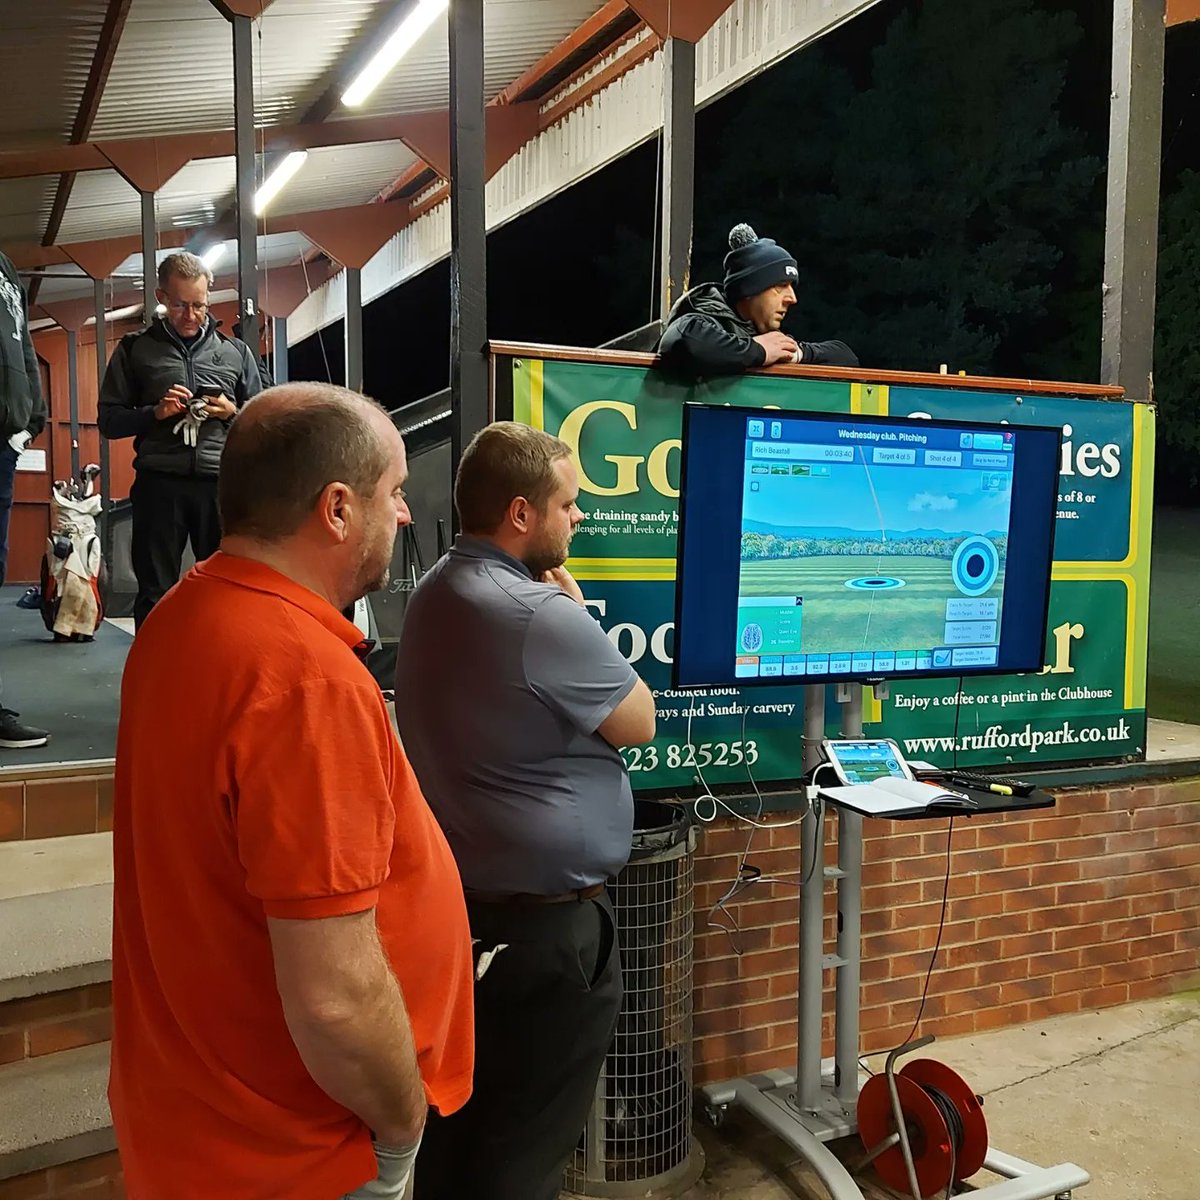 Another great Flightscope range evening. Top scoring from all that attended, with a new score from Garry. Everyone loved the food. Thanks to all who attended. Looking forward to next week's session @RuffordParkGolf Thanks